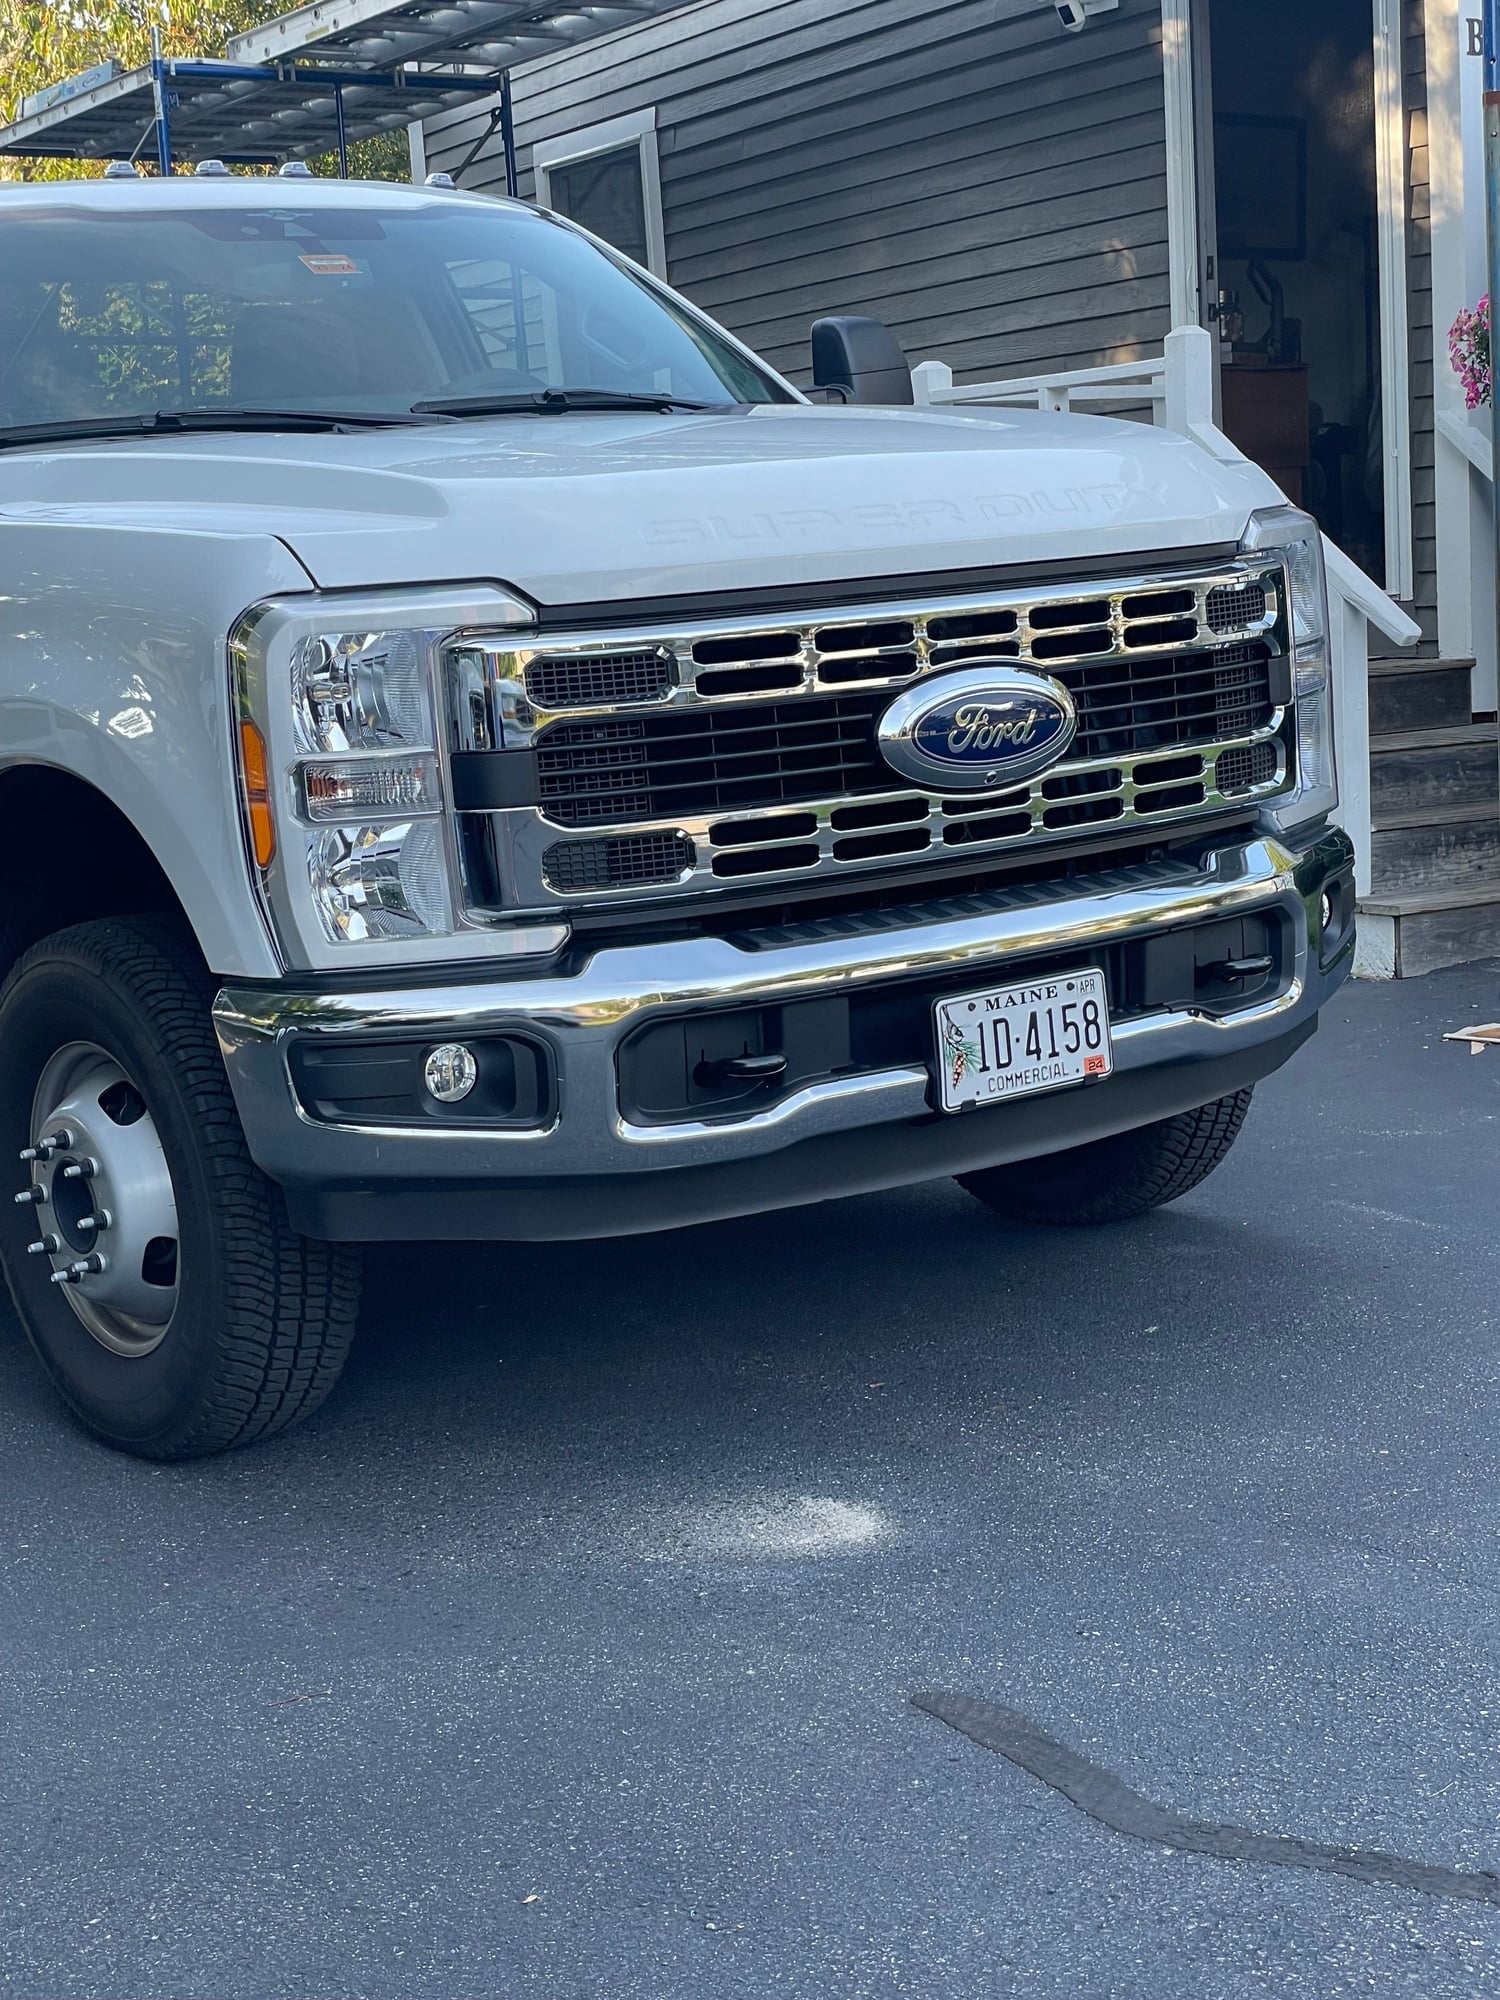 2023 Ford F-350 - Selling the boat so I’m selling the truck….like new 2023 F350 XLT... - Used - VIN 1FTRF3DN6PEC18163 - 3,000 Miles - 8 cyl - 4WD - Automatic - Truck - White - South Portland, ME 04106, United States